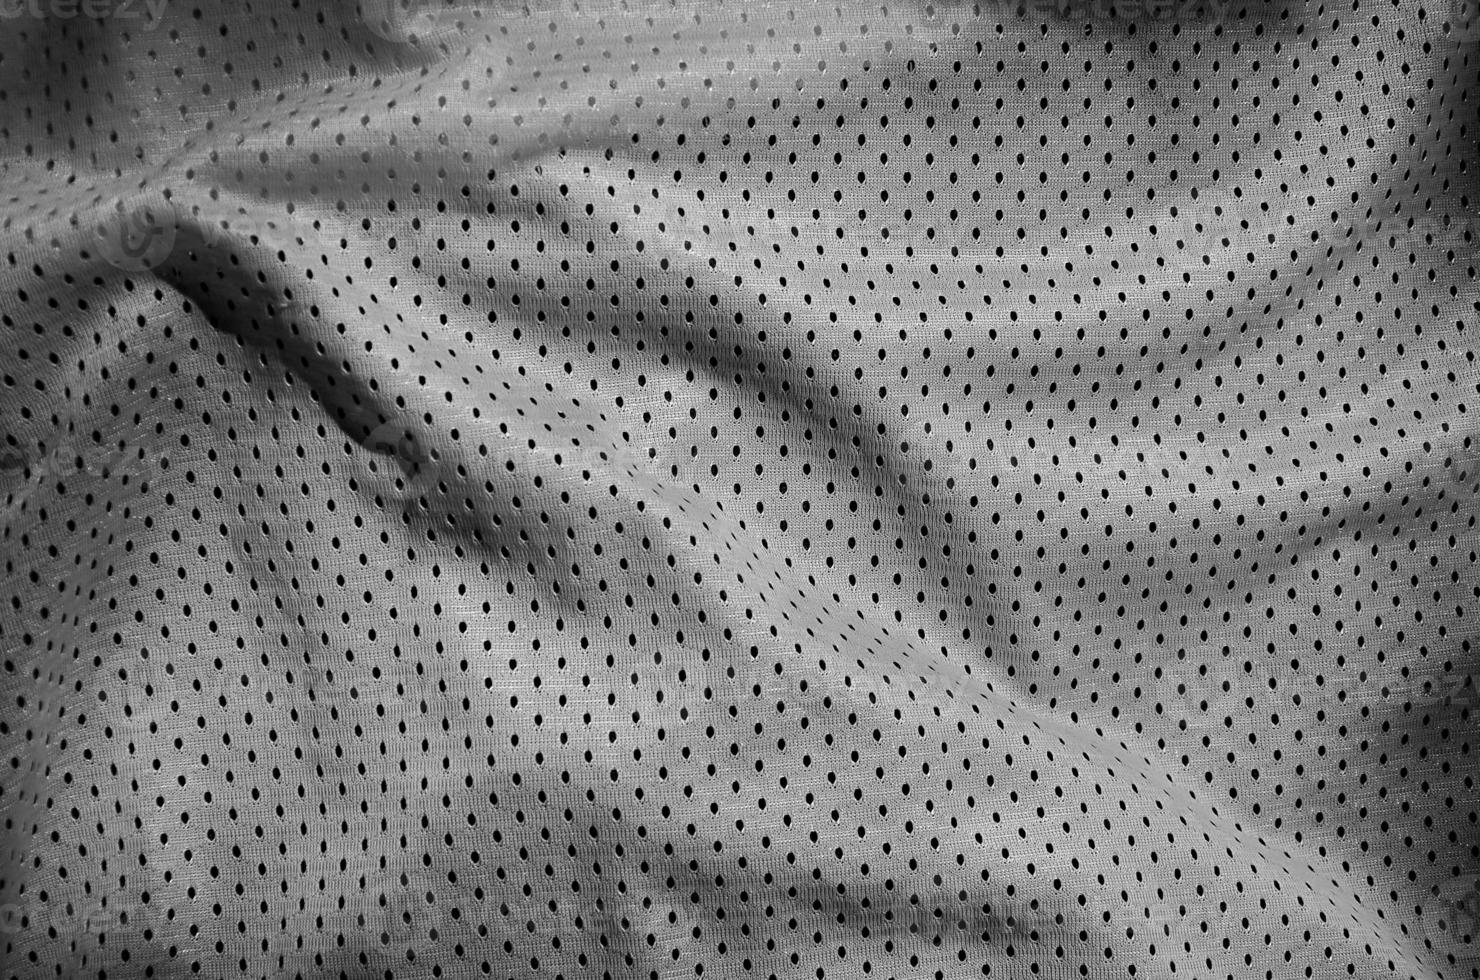 Grey sport clothing fabric texture background. Top view of grey cloth textile surface. Dark basketball shirt. photo